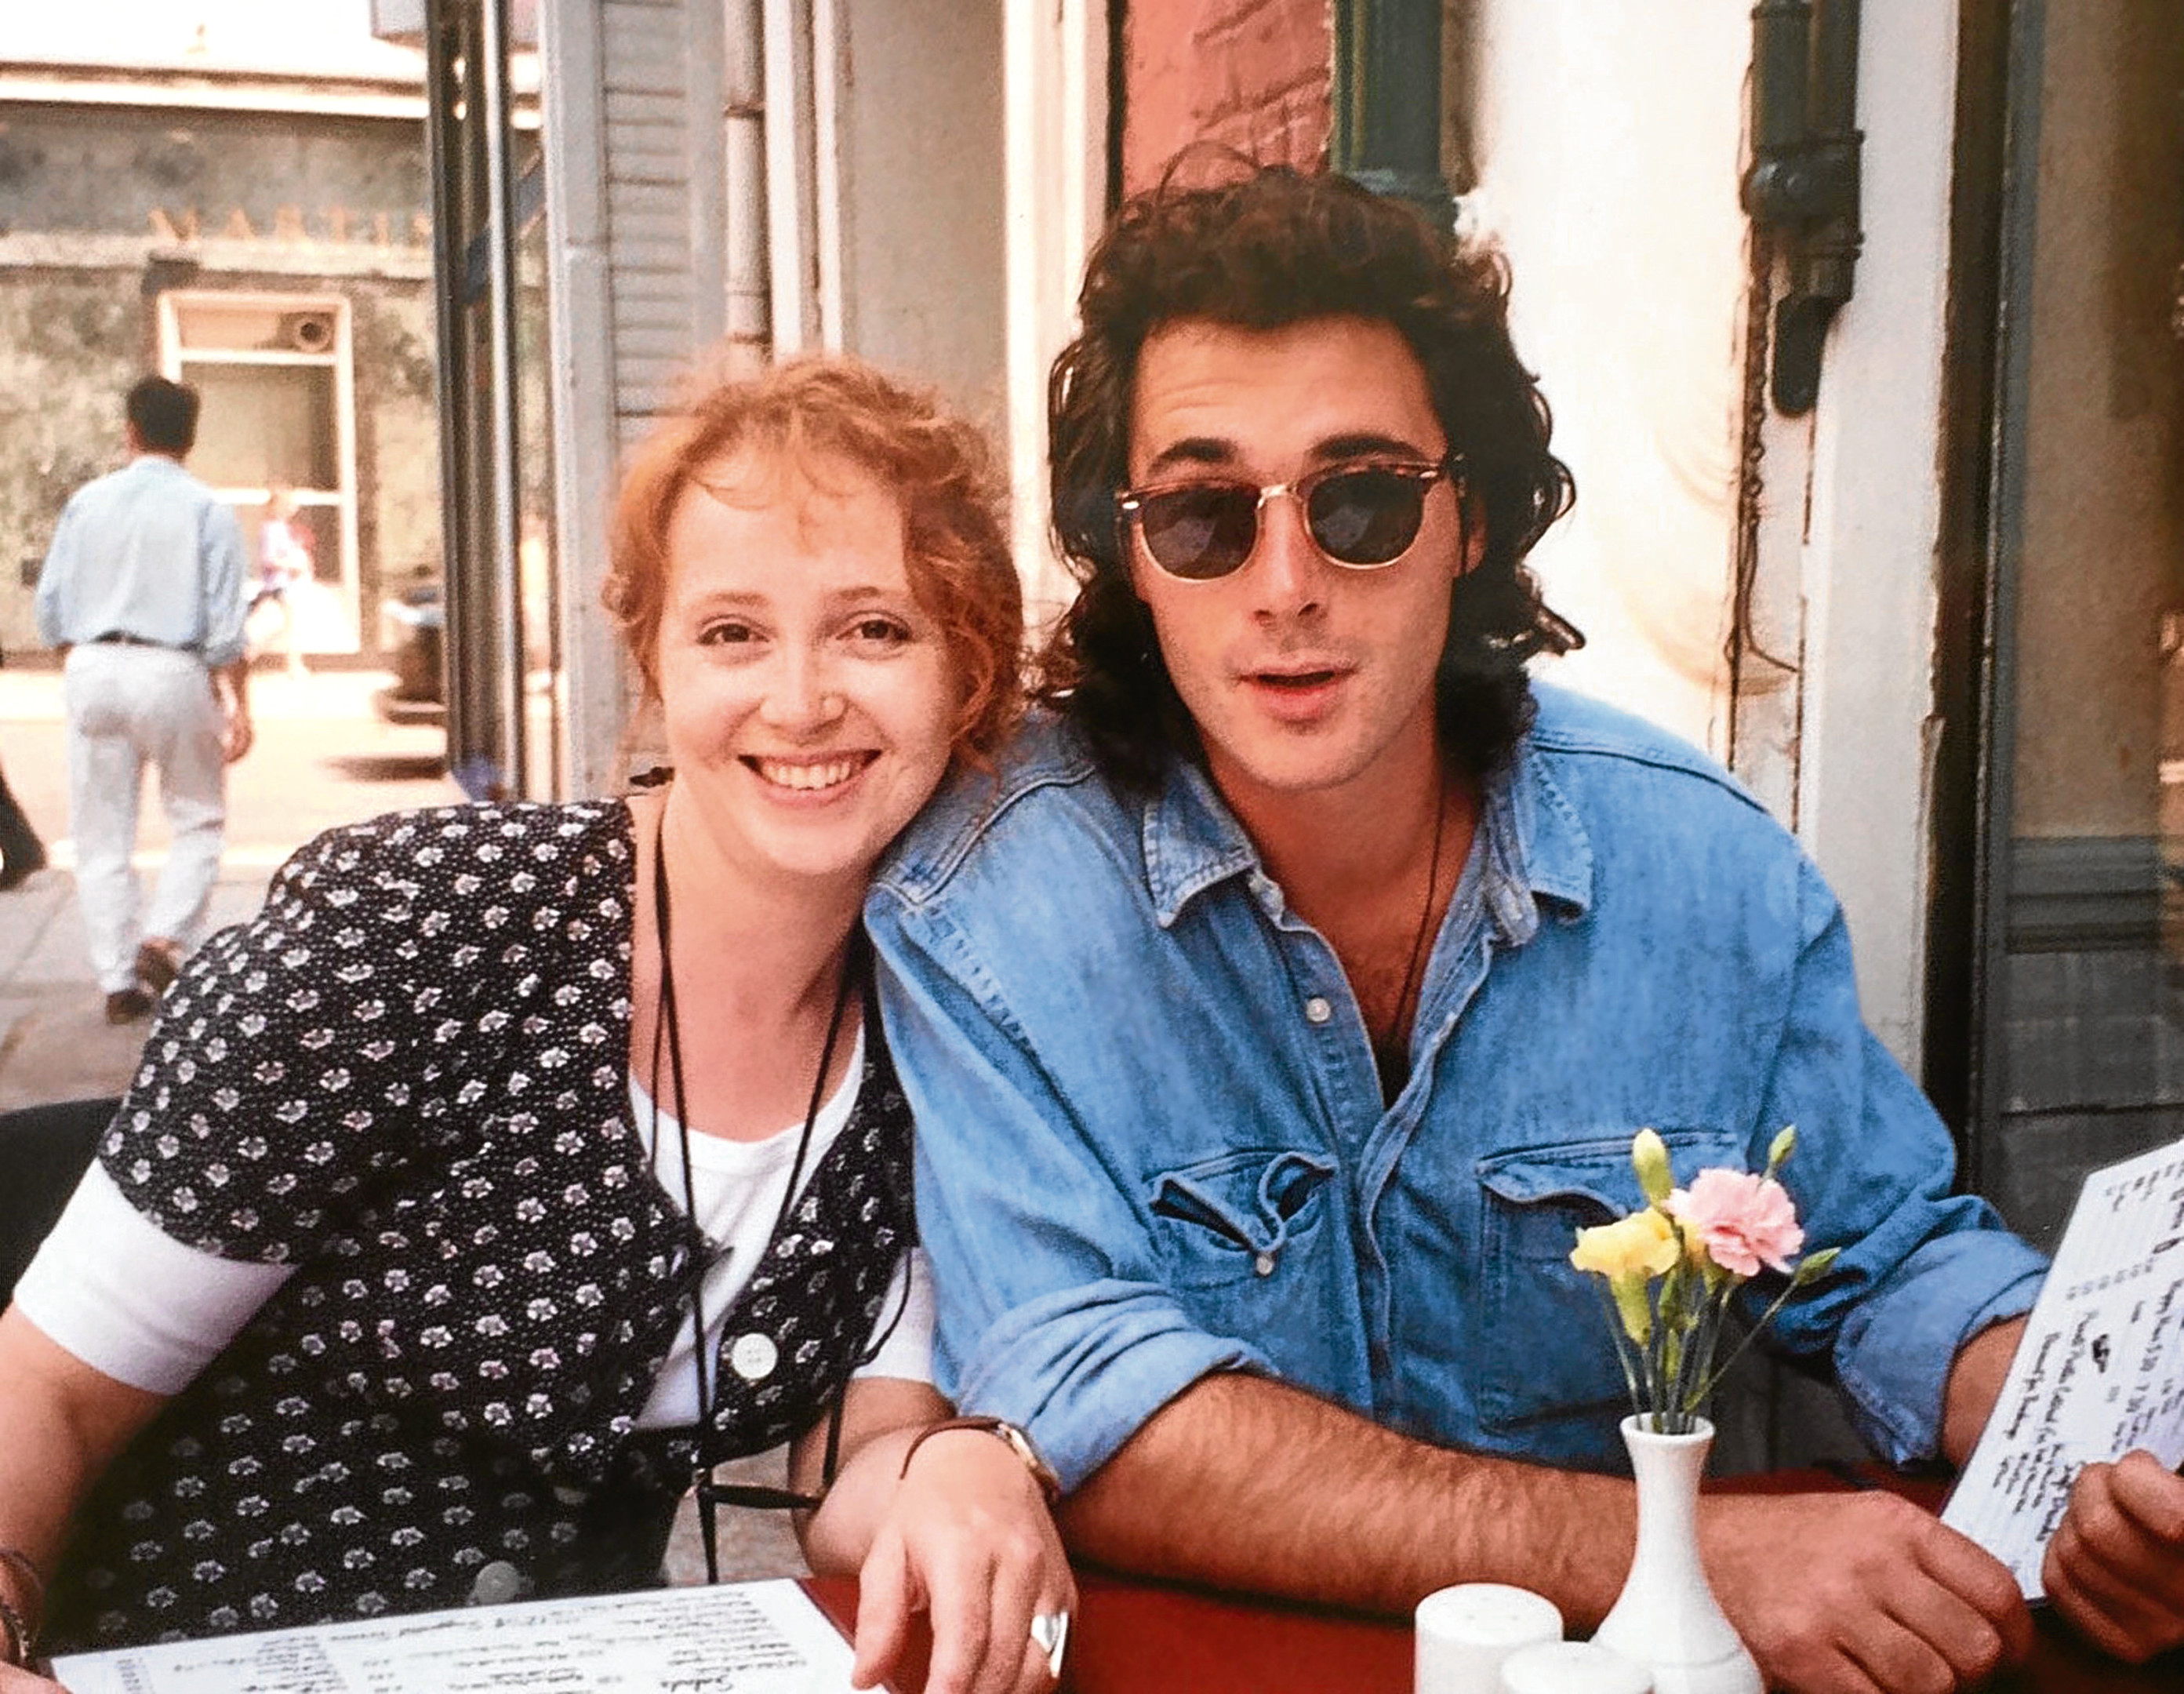 Greg Wise and his sister Clare in the mid 1980s. (Greg Wise/PA)